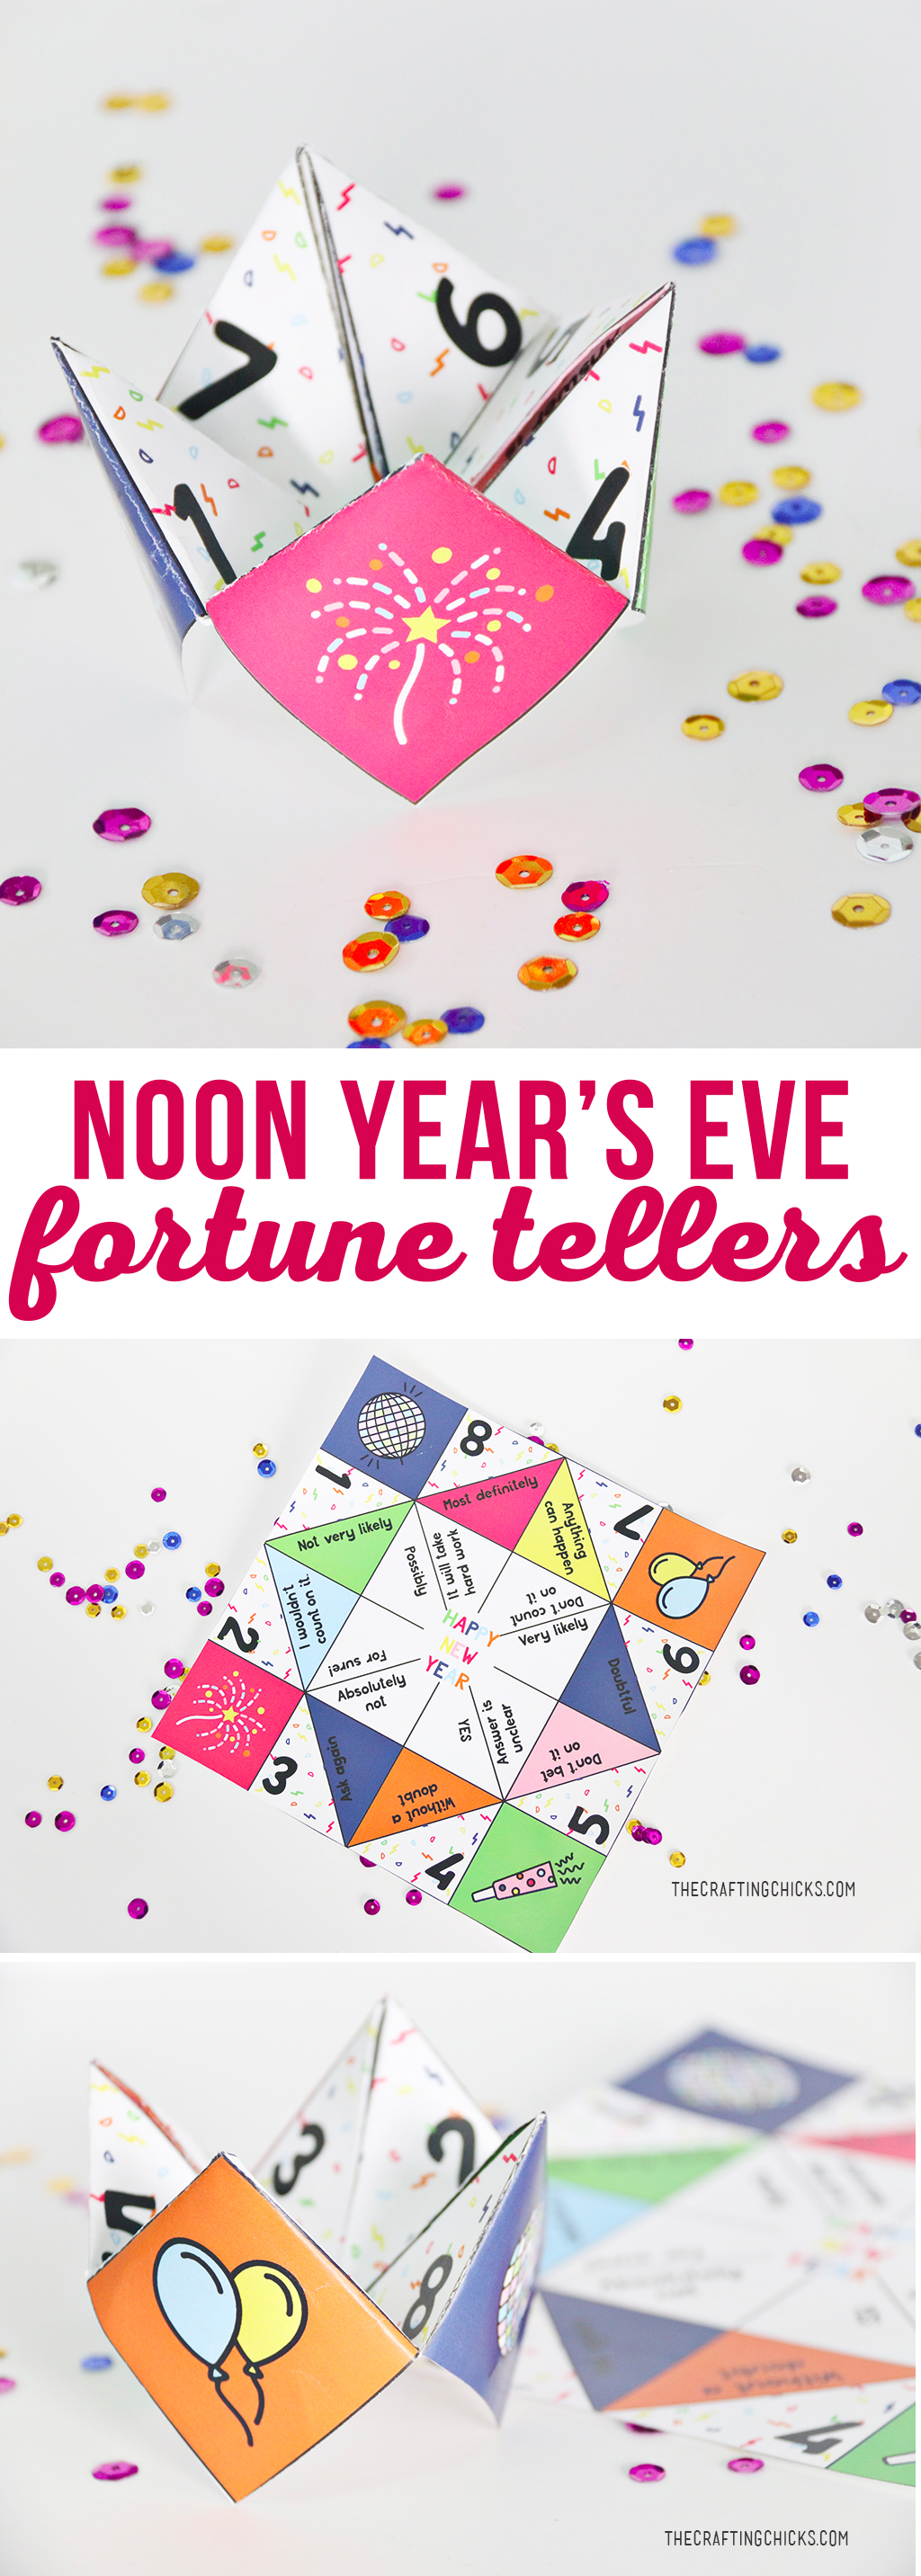 Noon Year's Eve Fortune Tellers